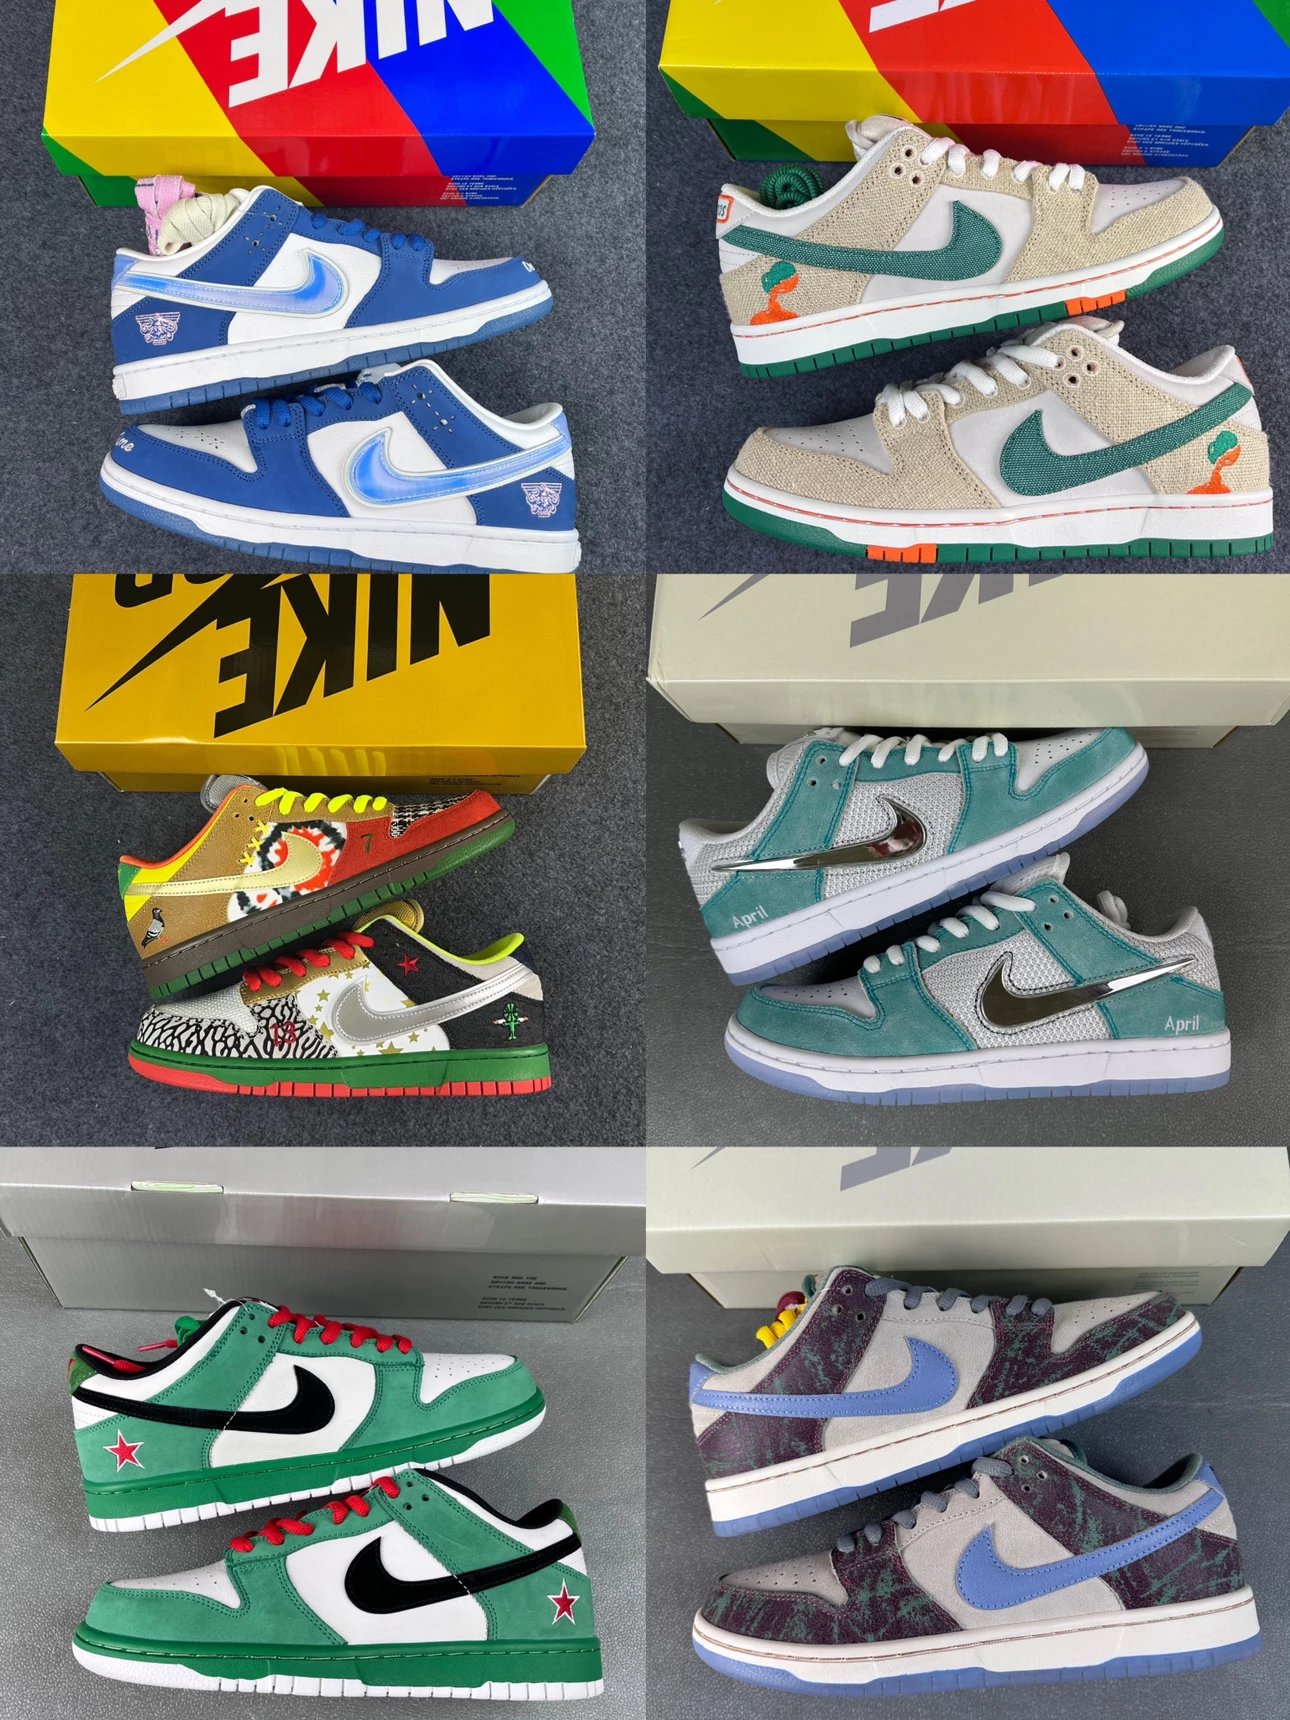 Item Thumbnail for TOP&S2 dunk/SBdunk Collection 2 Blue Bird/fly co-brand/black and white raw rubber dunk/Philadelphia/Mandarin duck/champion wing/wheat/denim blue